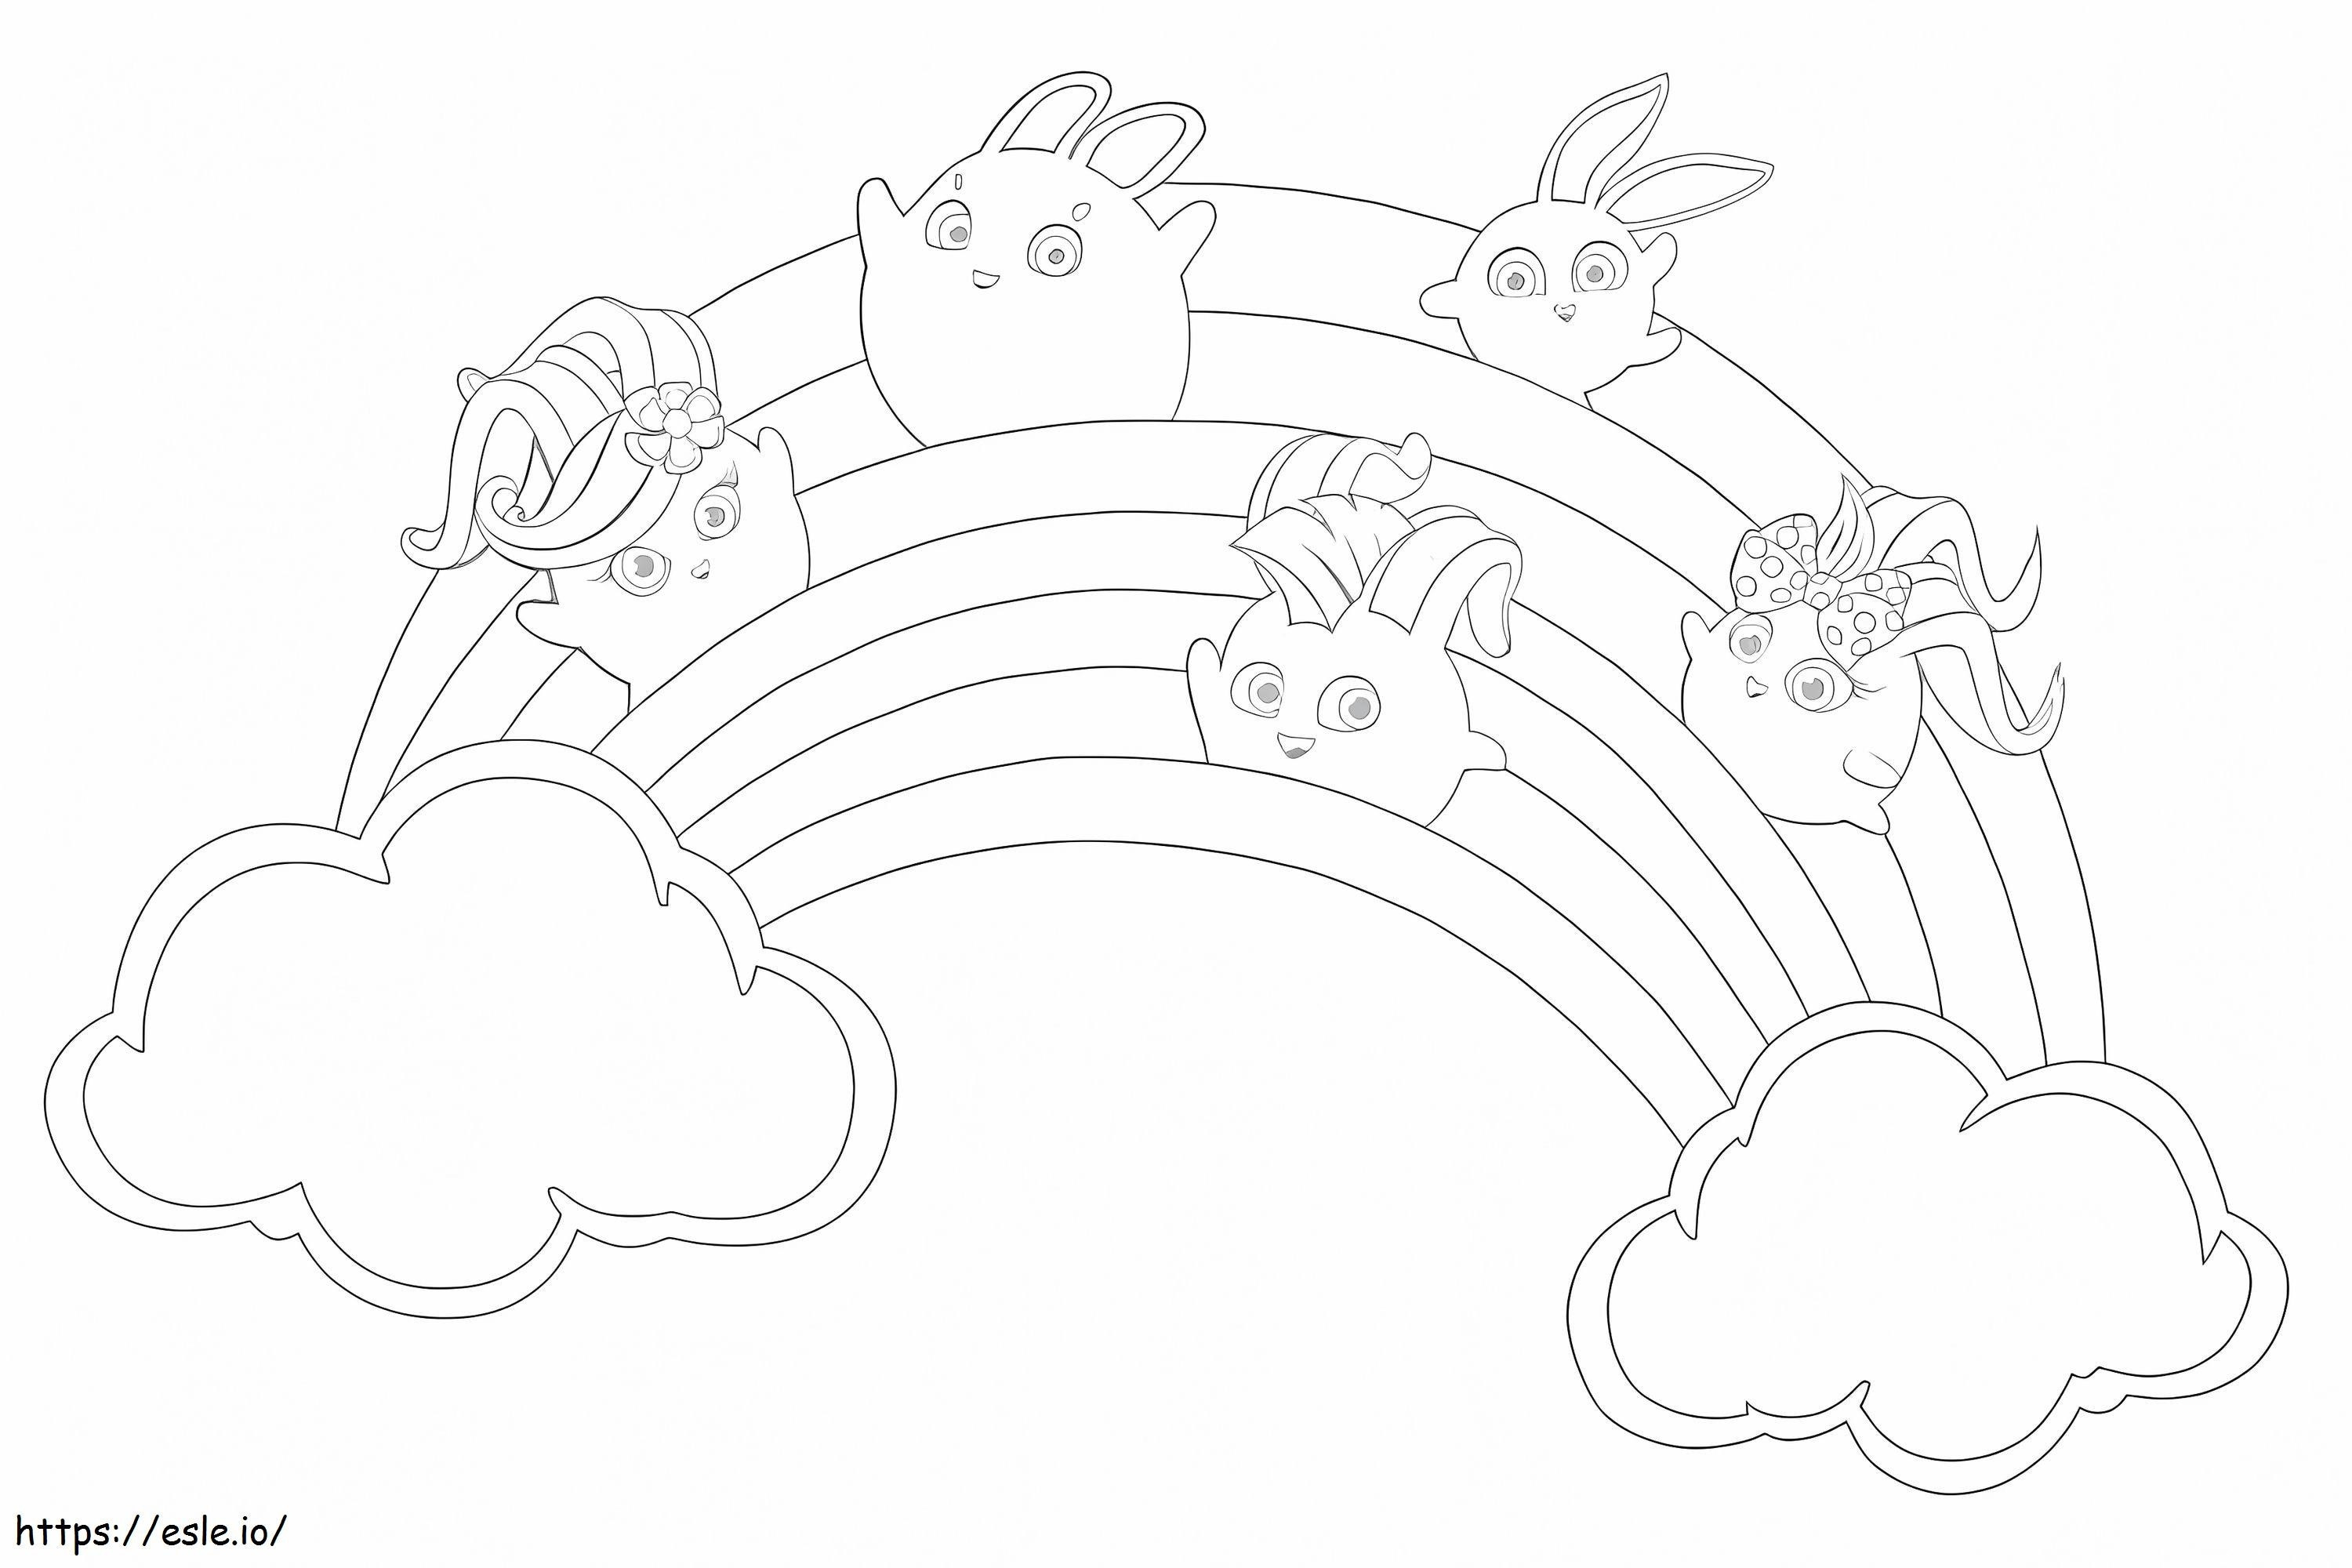 Sunny Bunnies 1 coloring page